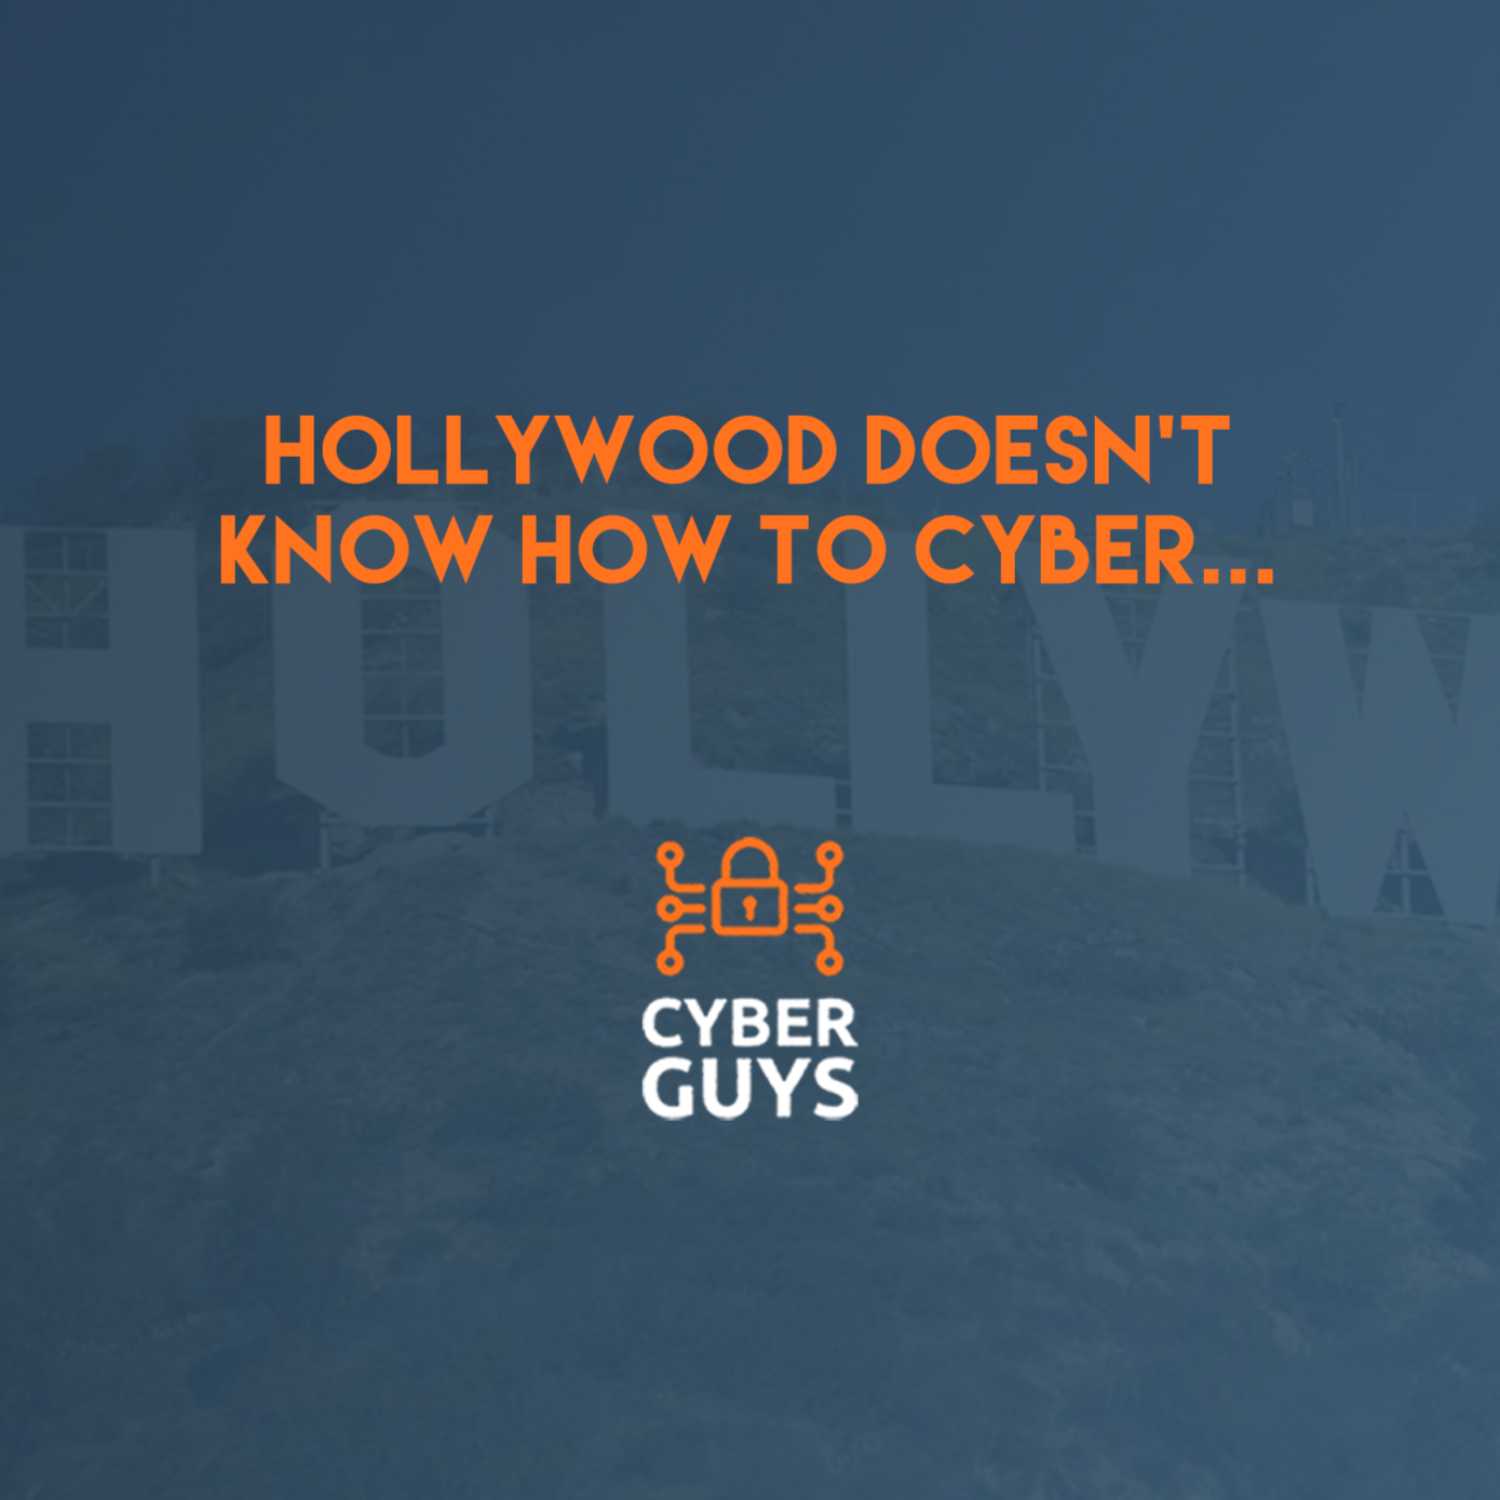 Hollywood Doesn't Know How to Cyber